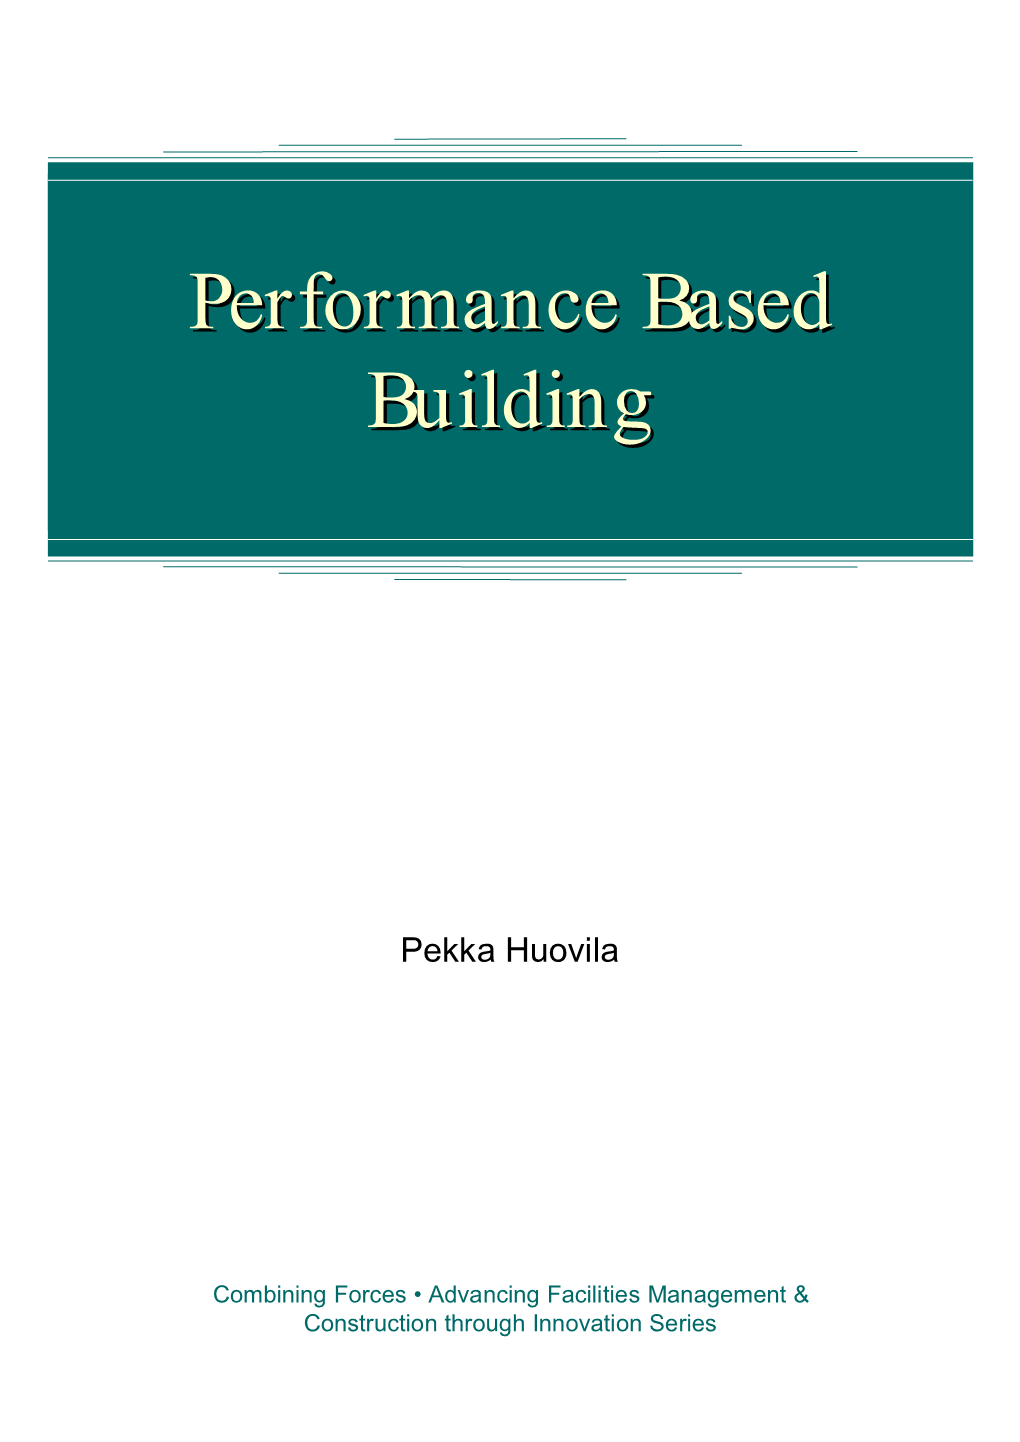 Performance Based Building